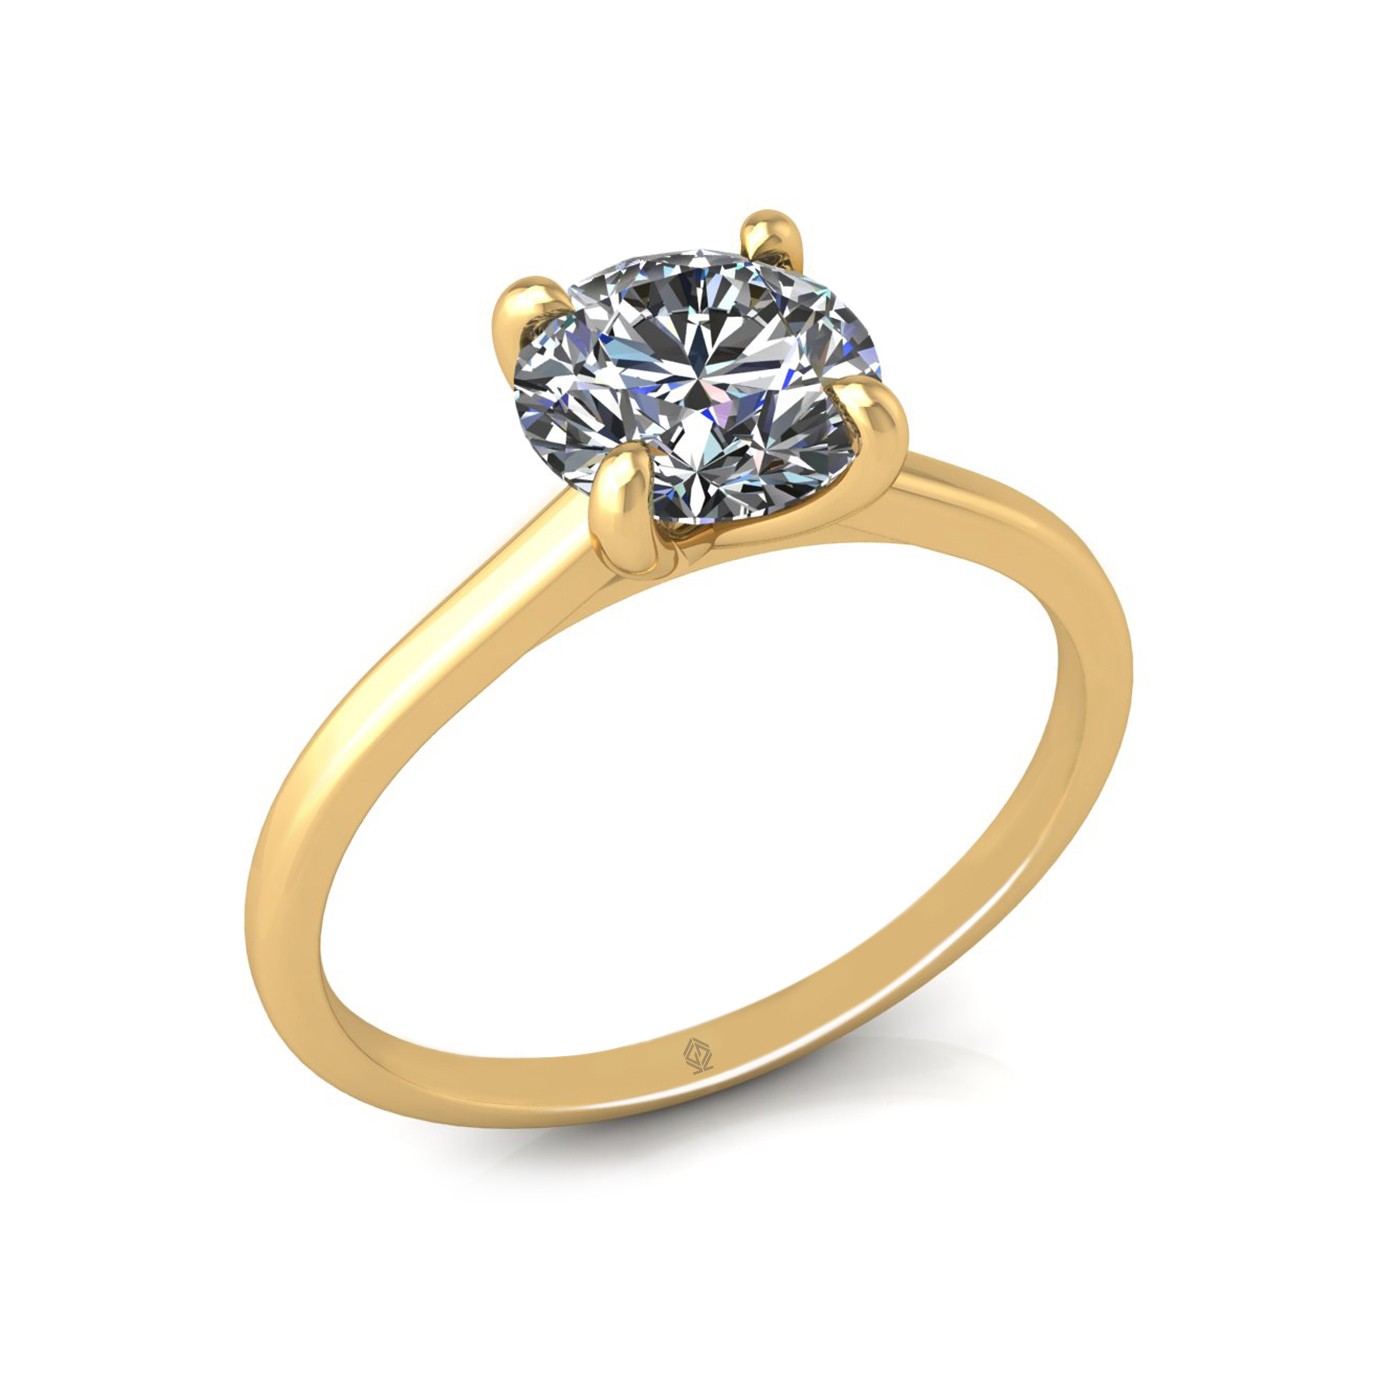 18k yellow gold 1.2ct 4 prongs solitaire round cut diamond engagement ring with whisper thin band